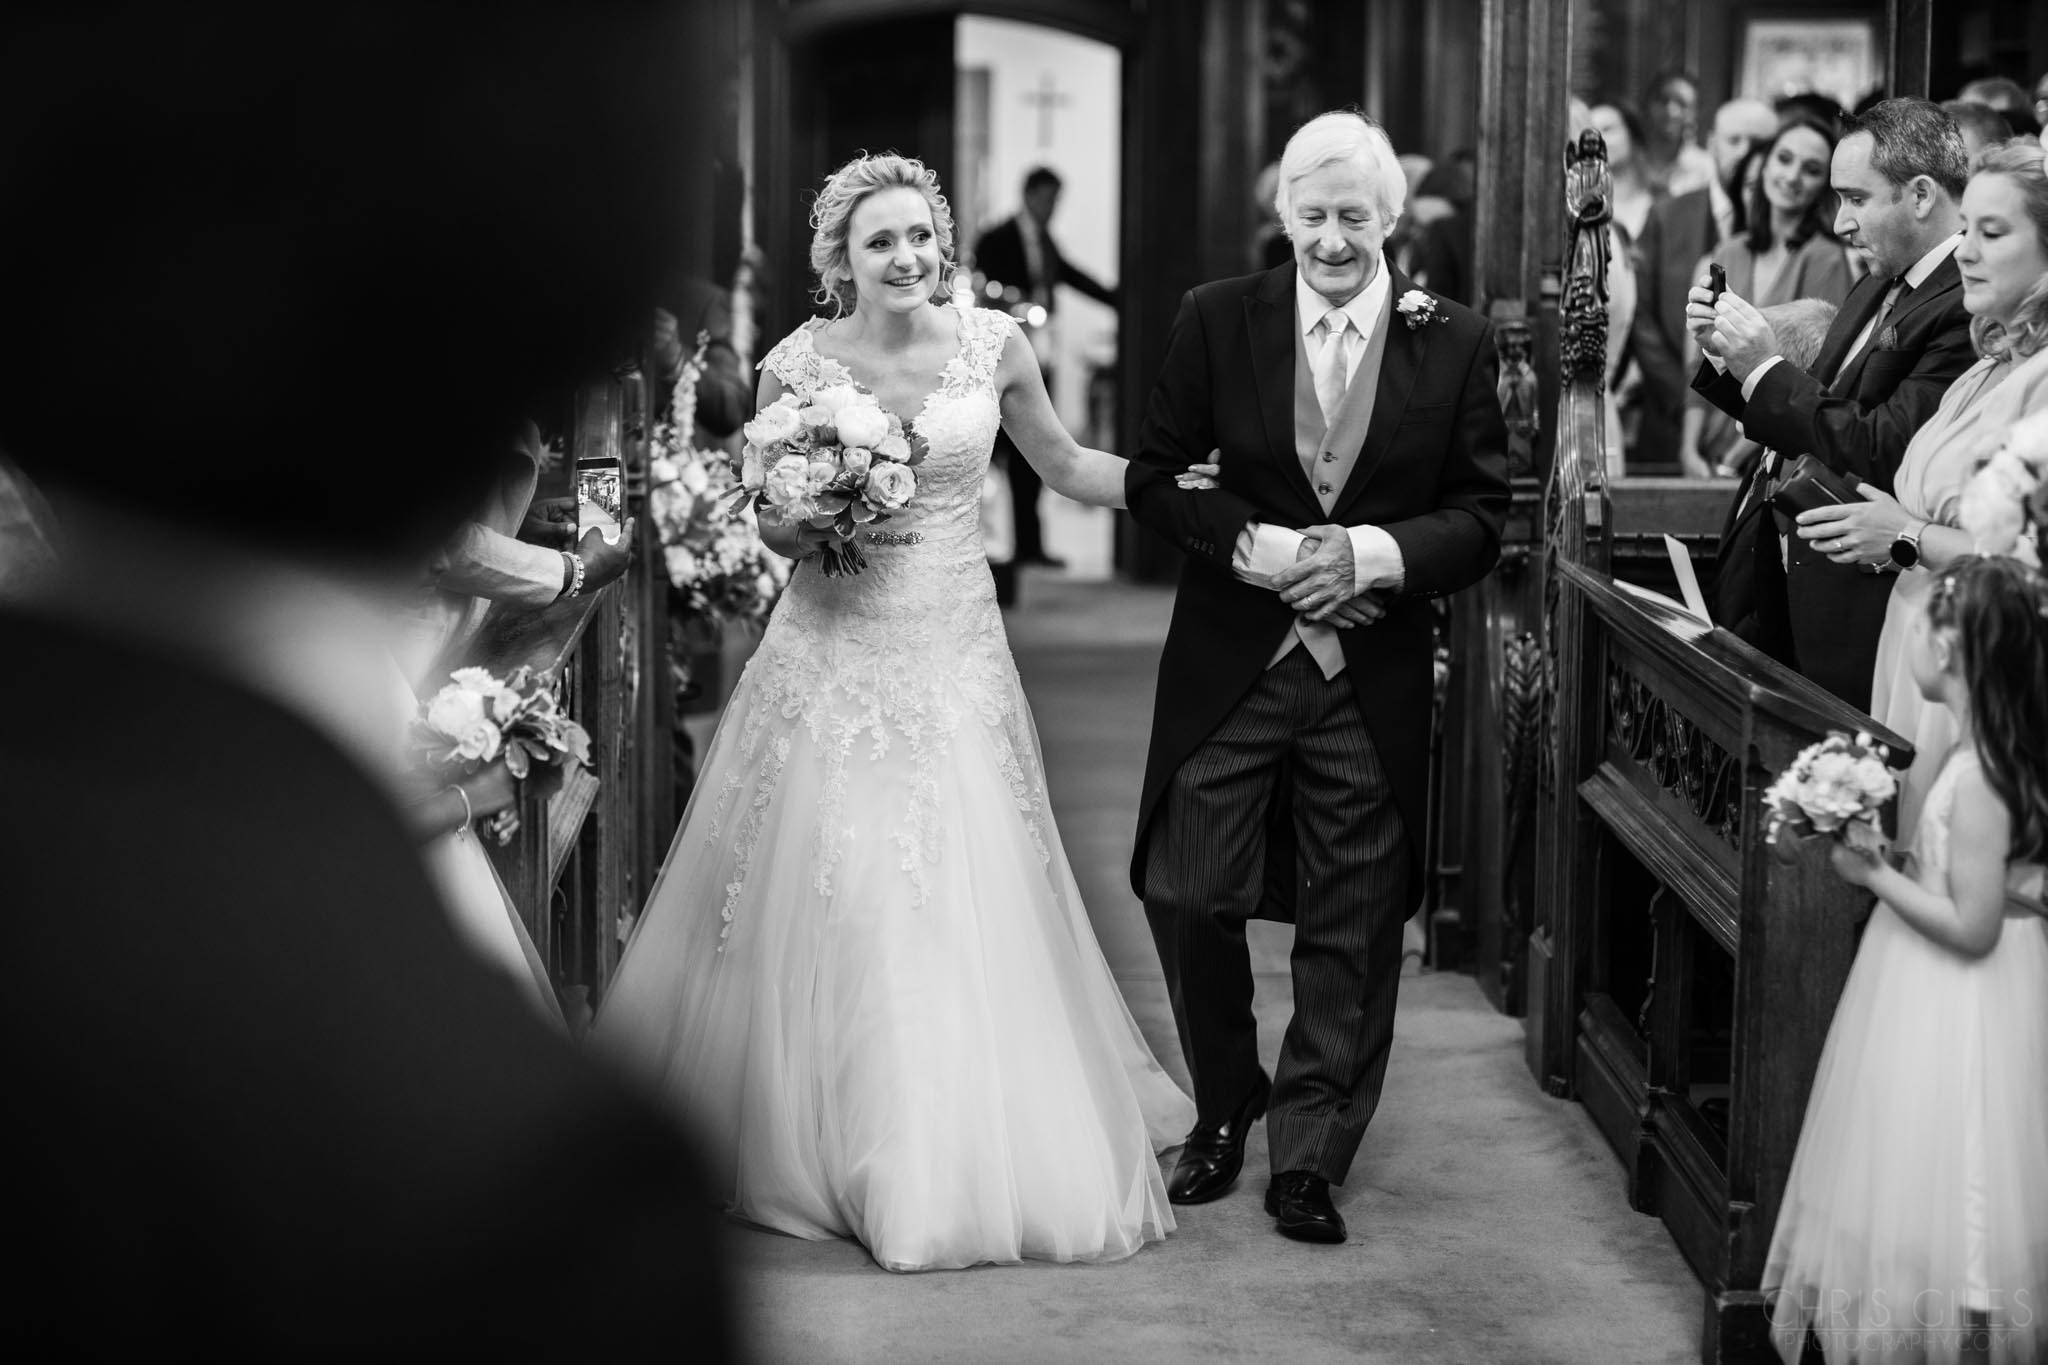 Wedding at Christ's Church Chapel in Dulwich